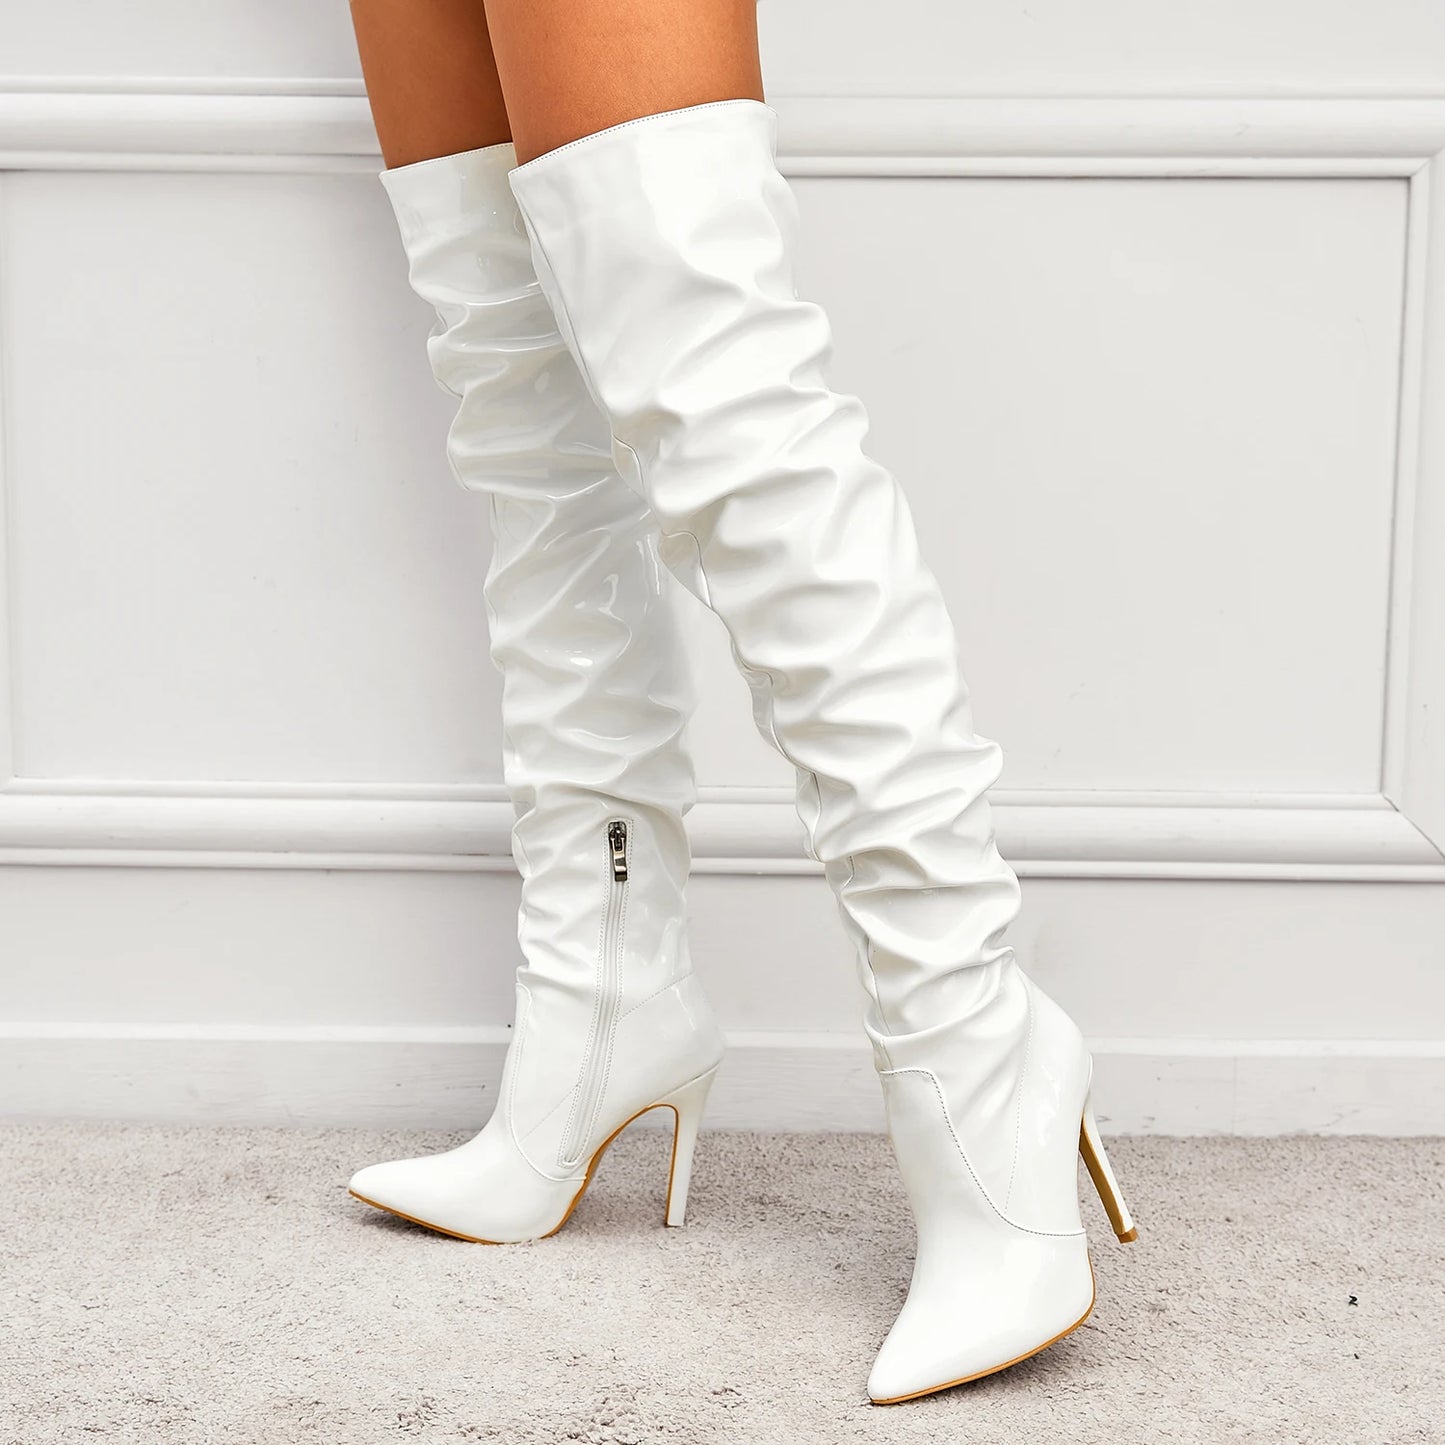 Patent Leather Over The Knee Chelsea Boots Women Shoes Heels Fashion Solid Sexy Thin High Heel Side Zippers Boots Female